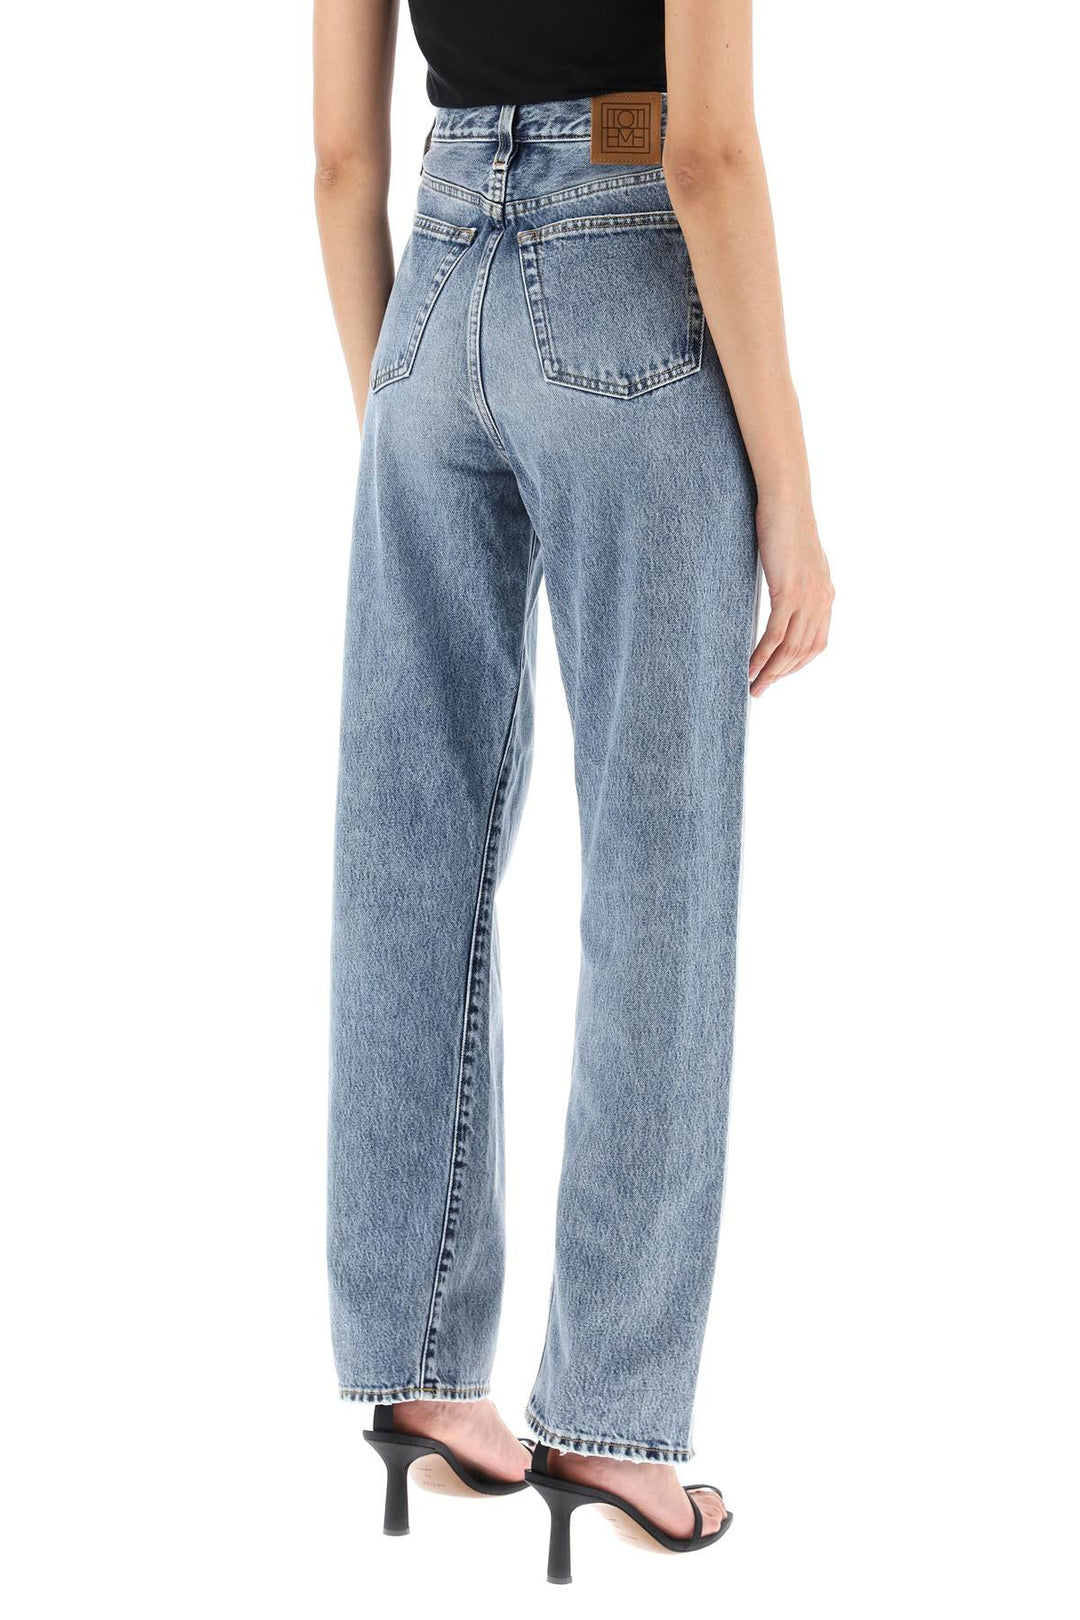 Toteme Twisted Seam Straight Jeans   Blue